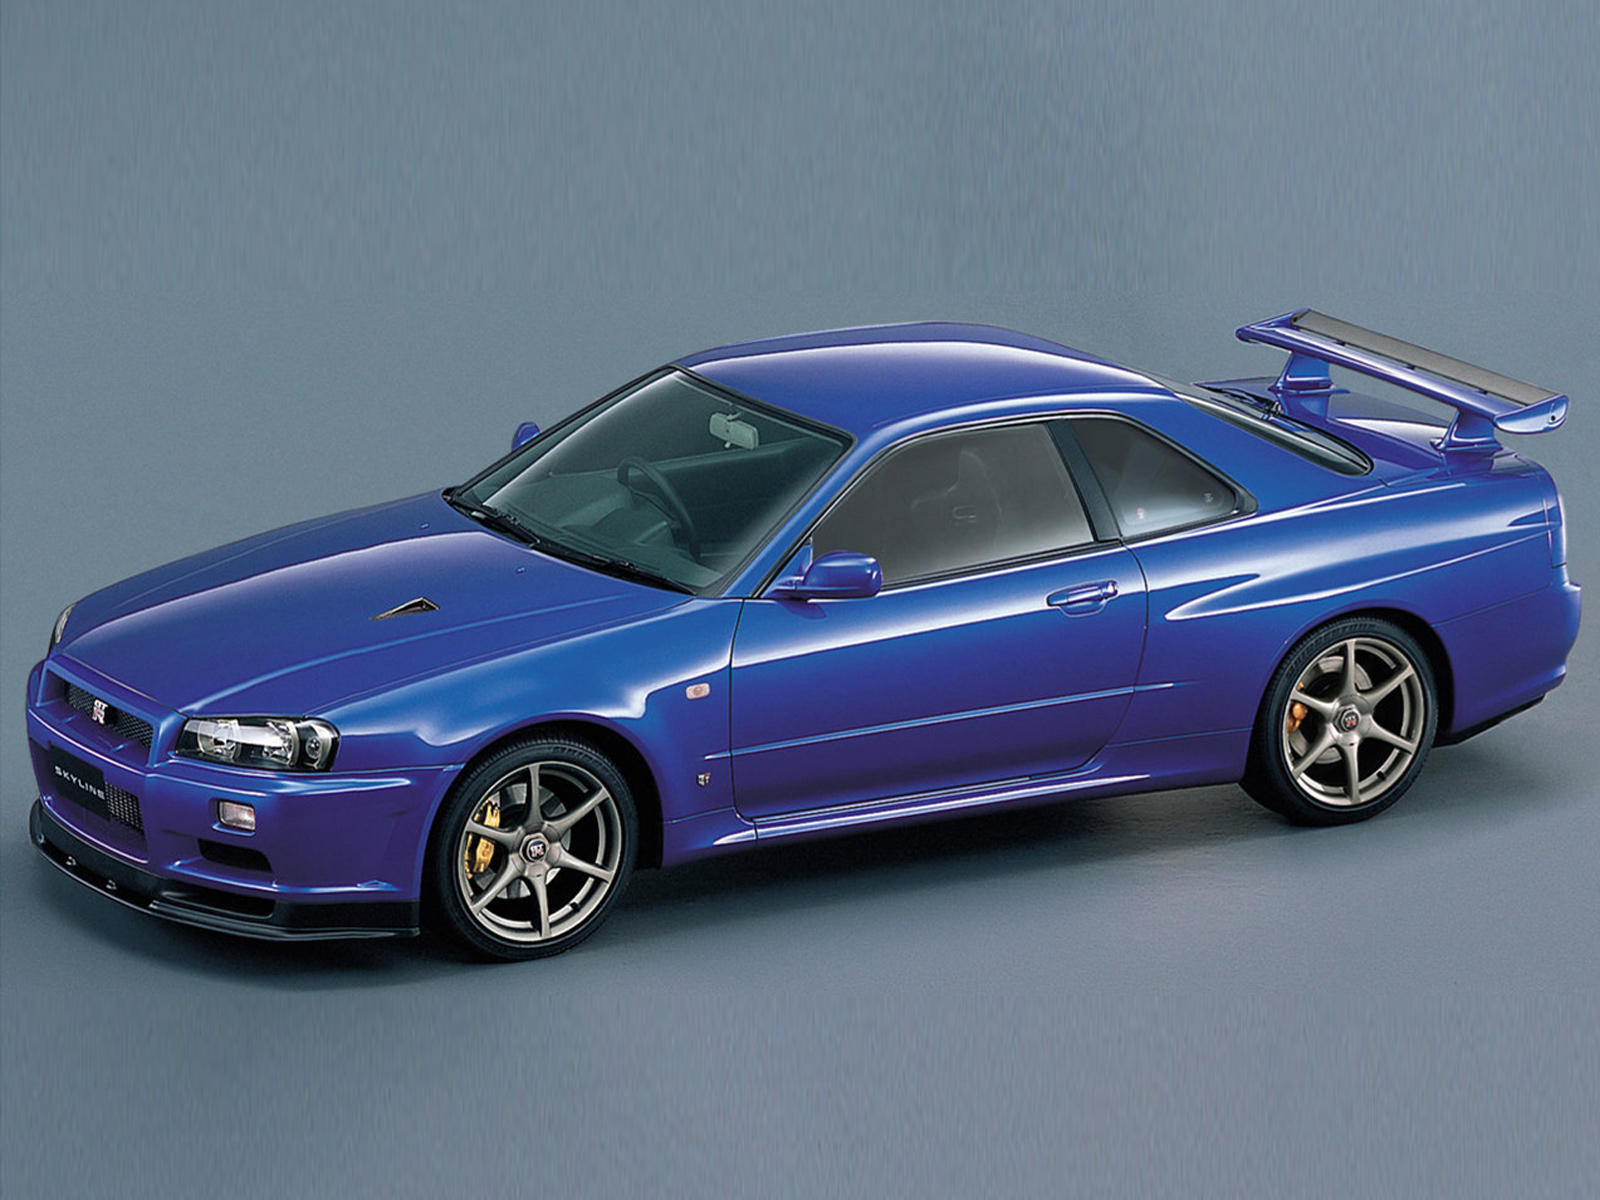 Nissan Skyline R34 GT-R Sets A Record-Breaking Price